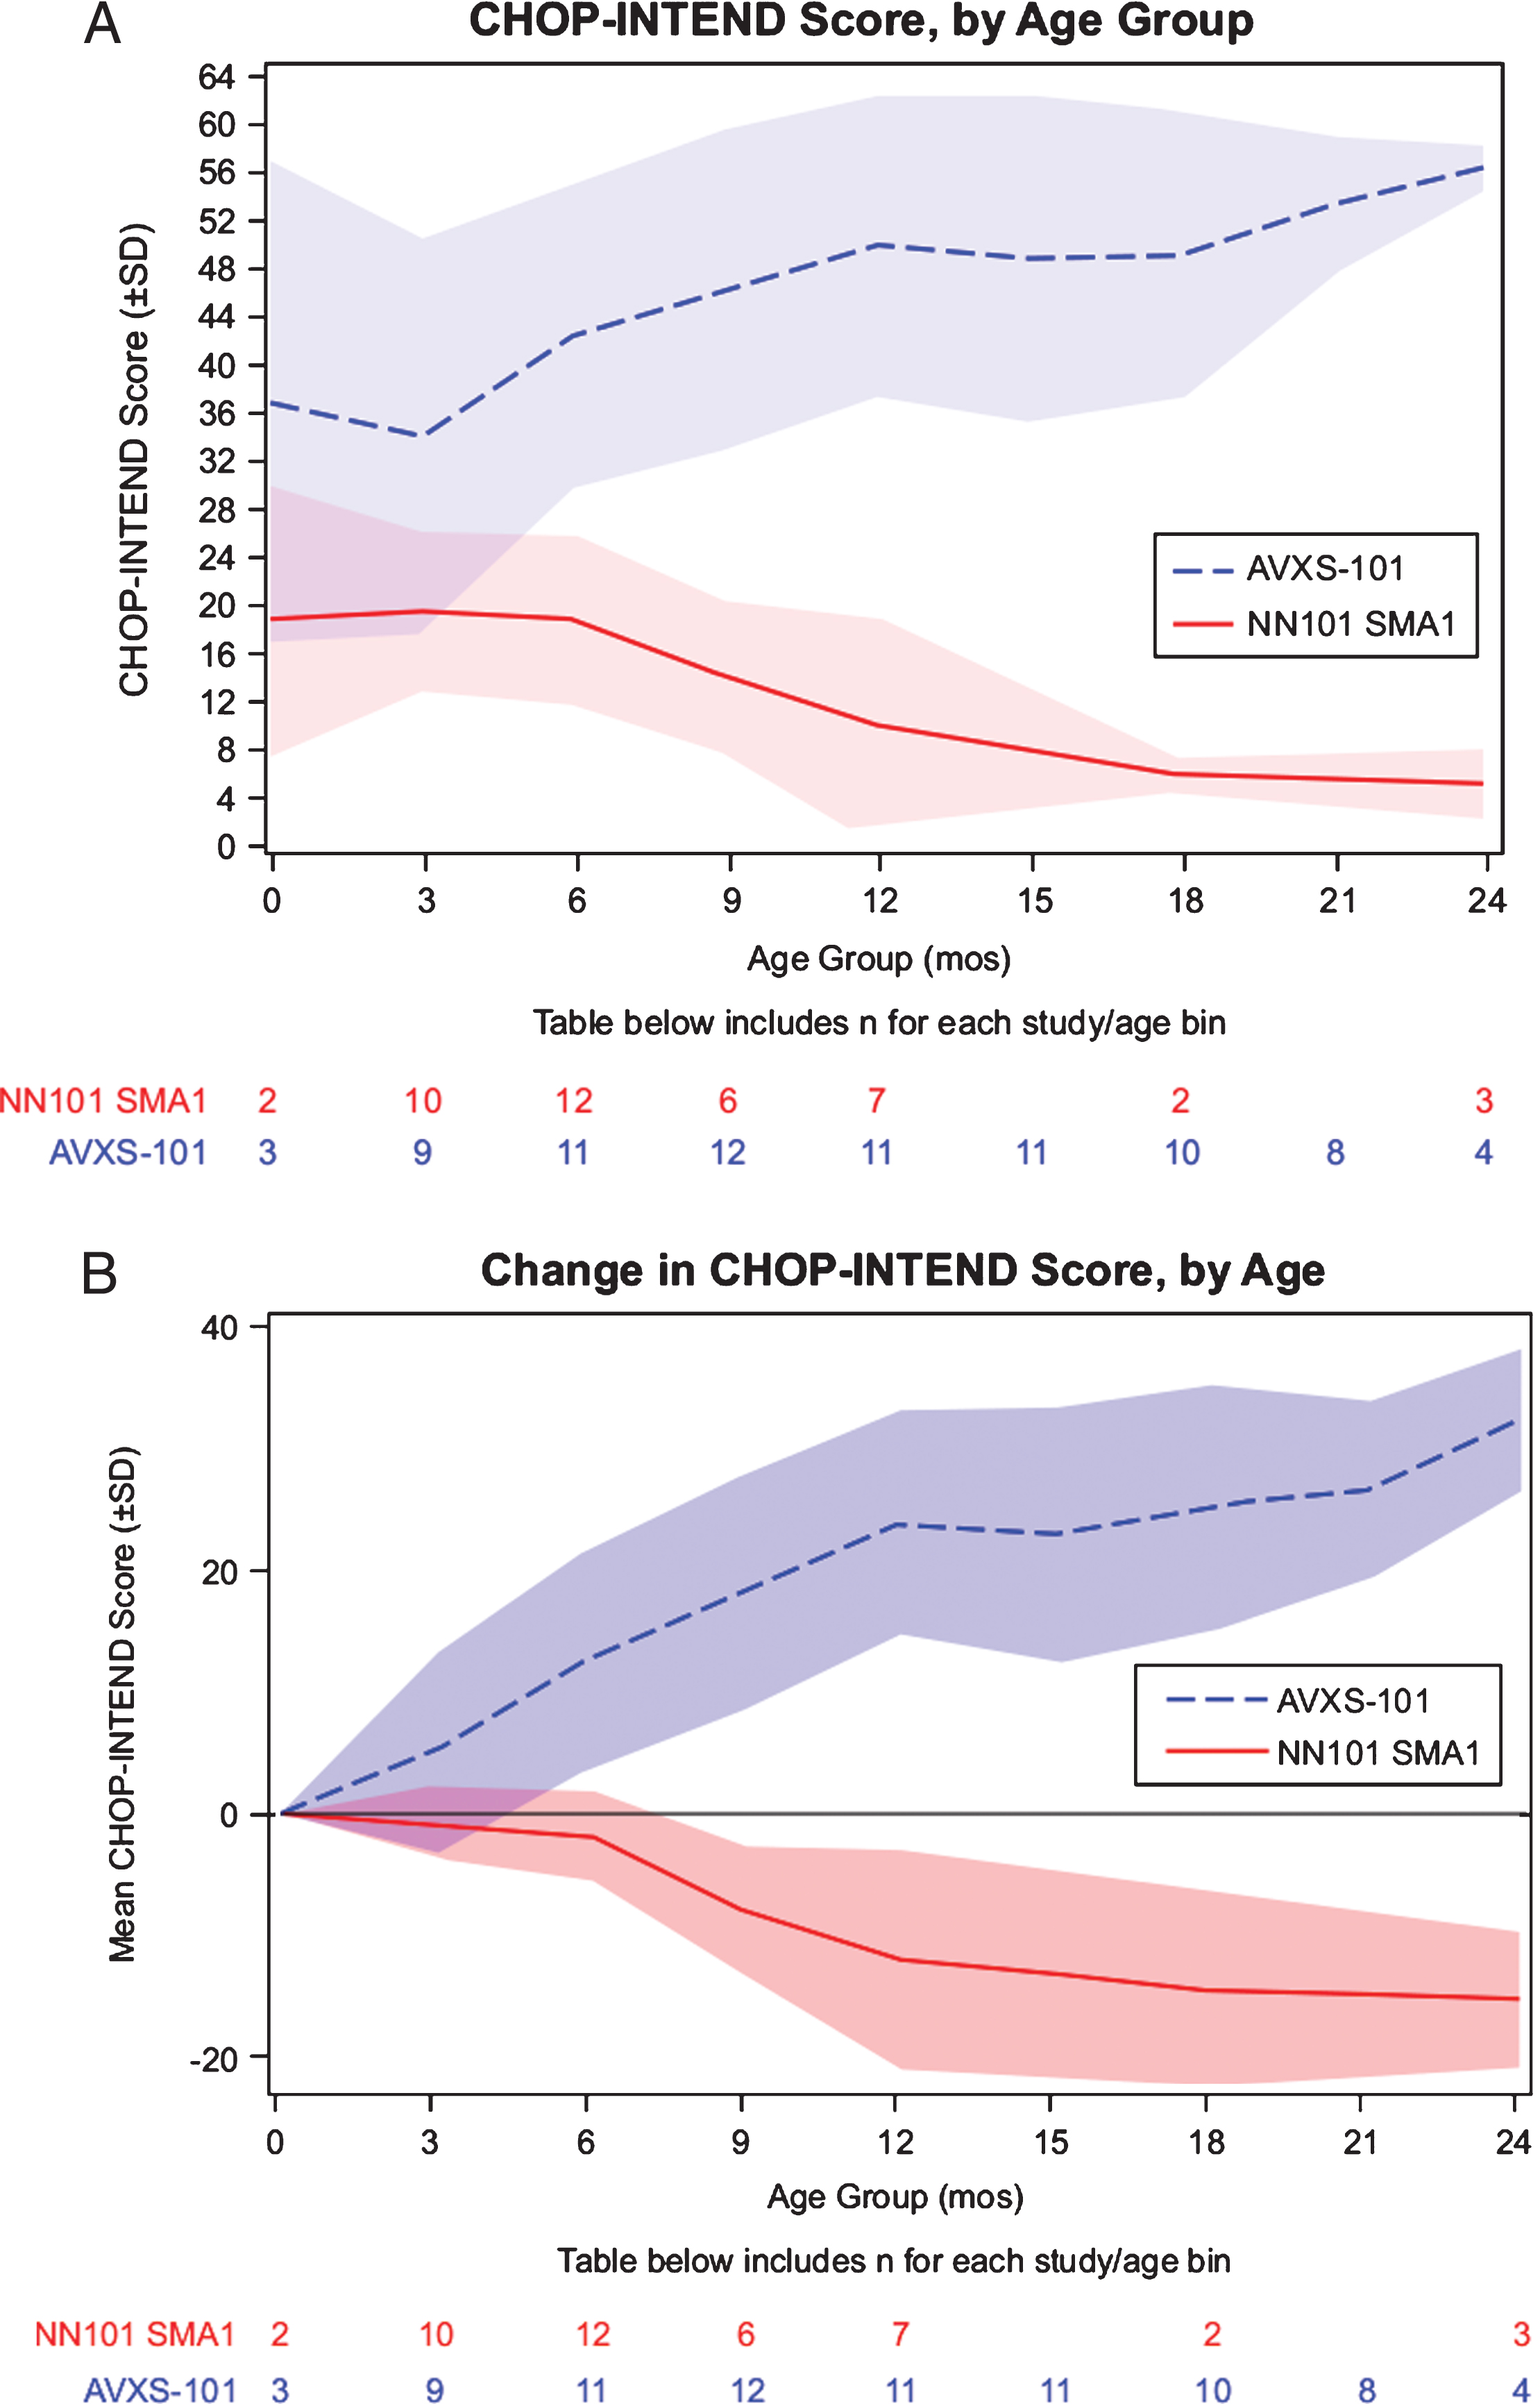 Motor function analysis of the AVXS-101 and NN101 studies. (A) Maximum longitudinal CHOP-INTEND scores reached. Mean CHOP-INTEND scores by infant age are shown; shaded areas indicate the standard deviation for each mean at each study visit. (B) Change in longitudinal CHOP-INTEND score up to 24 months of age. CHOP-INTEND, Children’s Hospital of Philadelphia Infant Test of Neuromuscular Disorders. SD, standard deviation. SMA1, spinal muscular atrophy type 1.